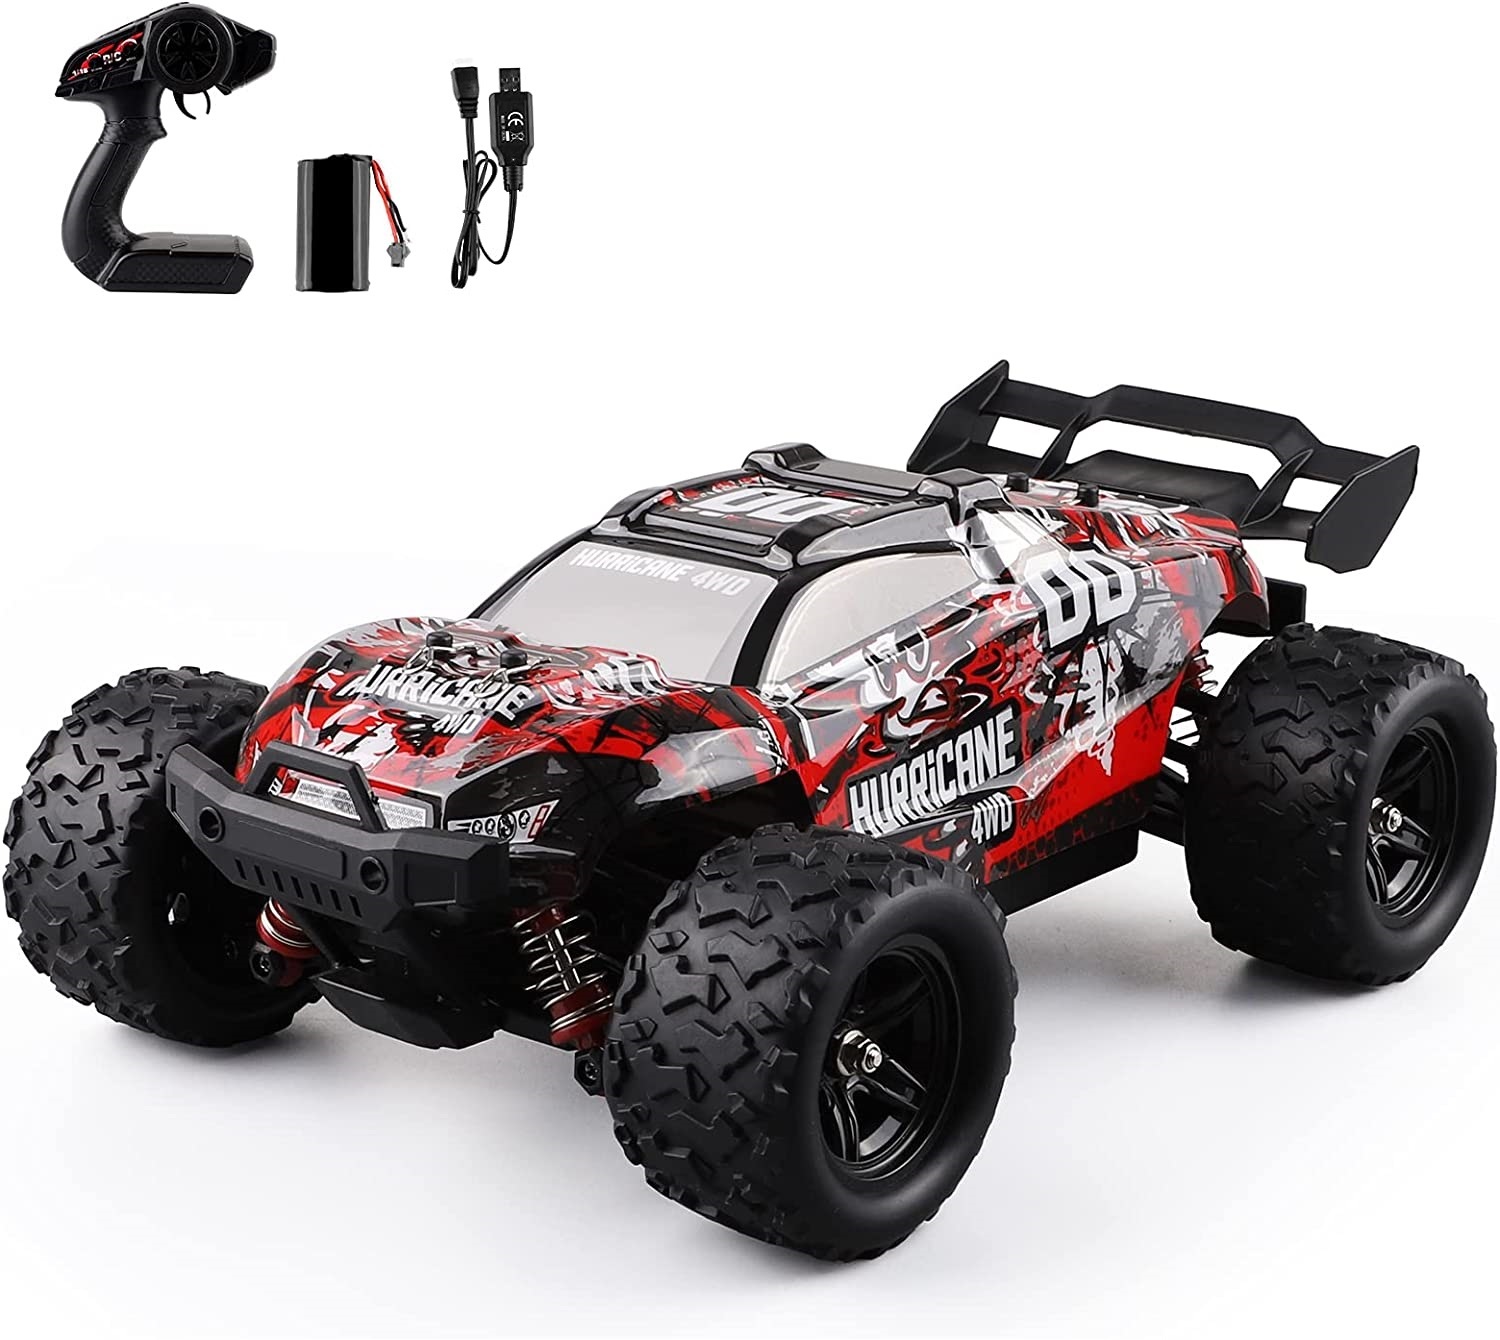 18322 4WD Off-Road RC Monster Truck 1:18th 2.4GHz Remote Control